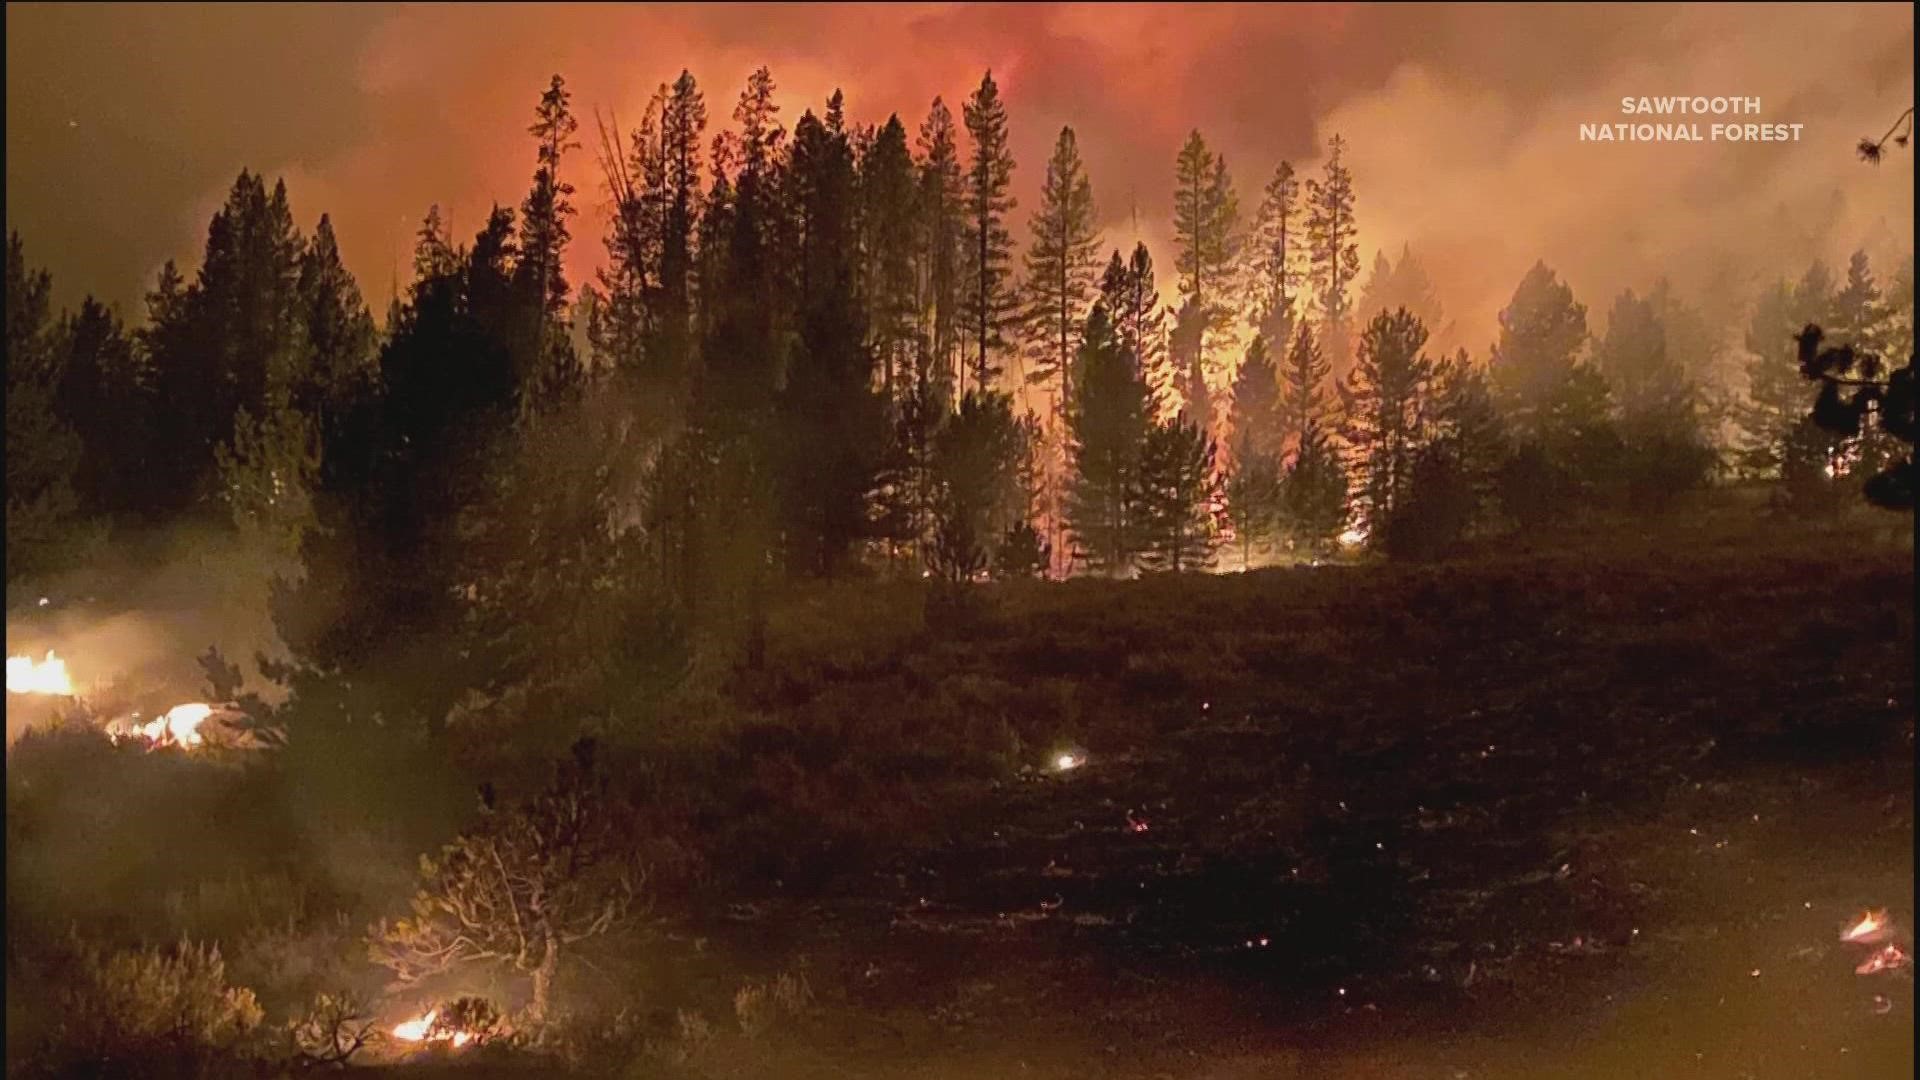 The Moose Fire, Idaho's largest, has burned nearly 200 square miles northwest of Salmon. The Ross Fork Fire has evacuations in place for part of Sawtooths.